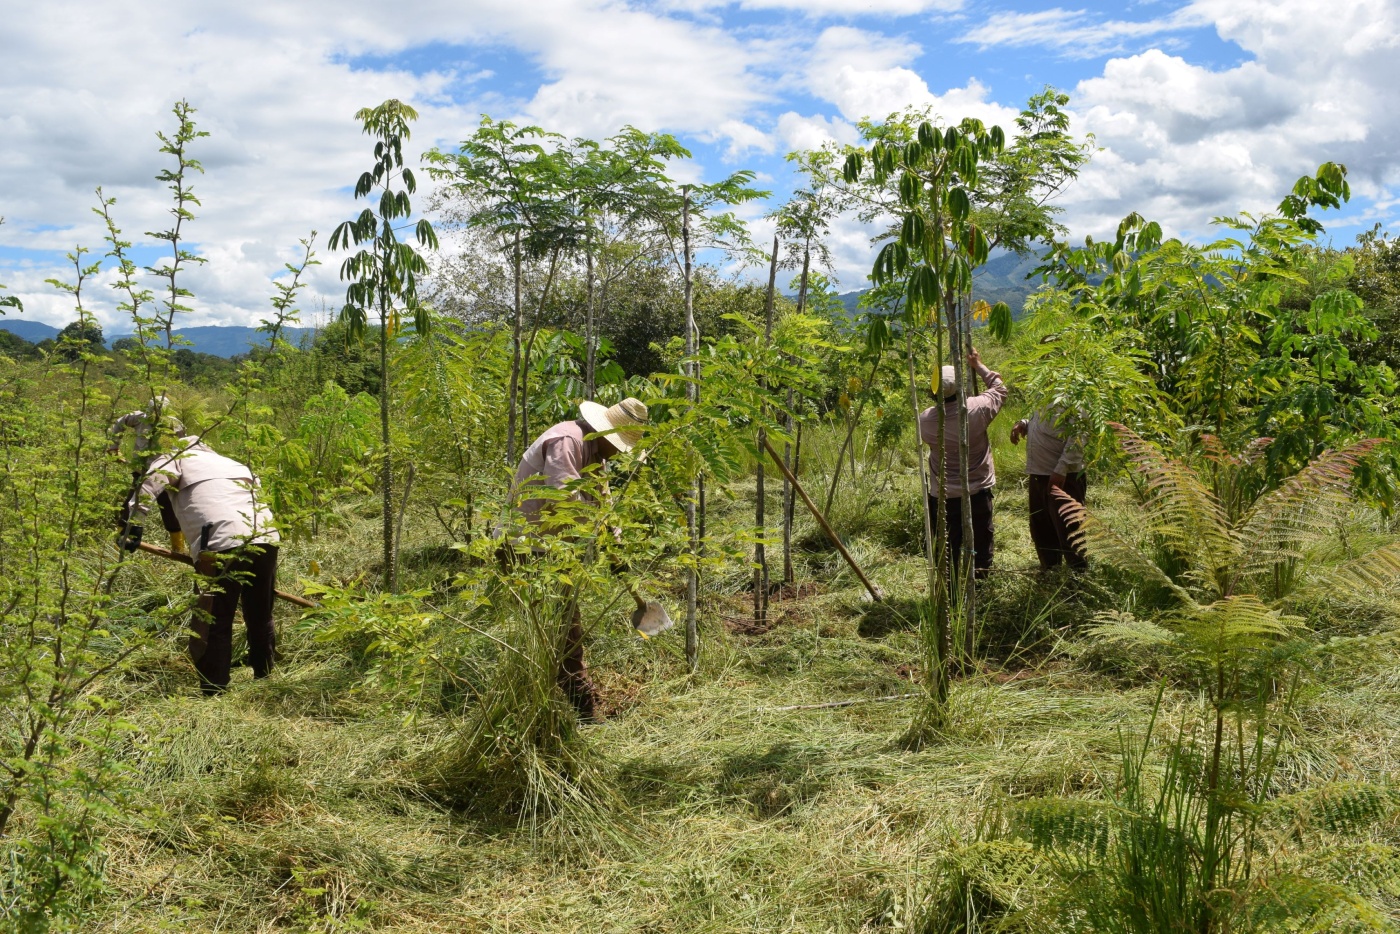 6 ways restoring degraded land has transformed Latin America and the Caribbean